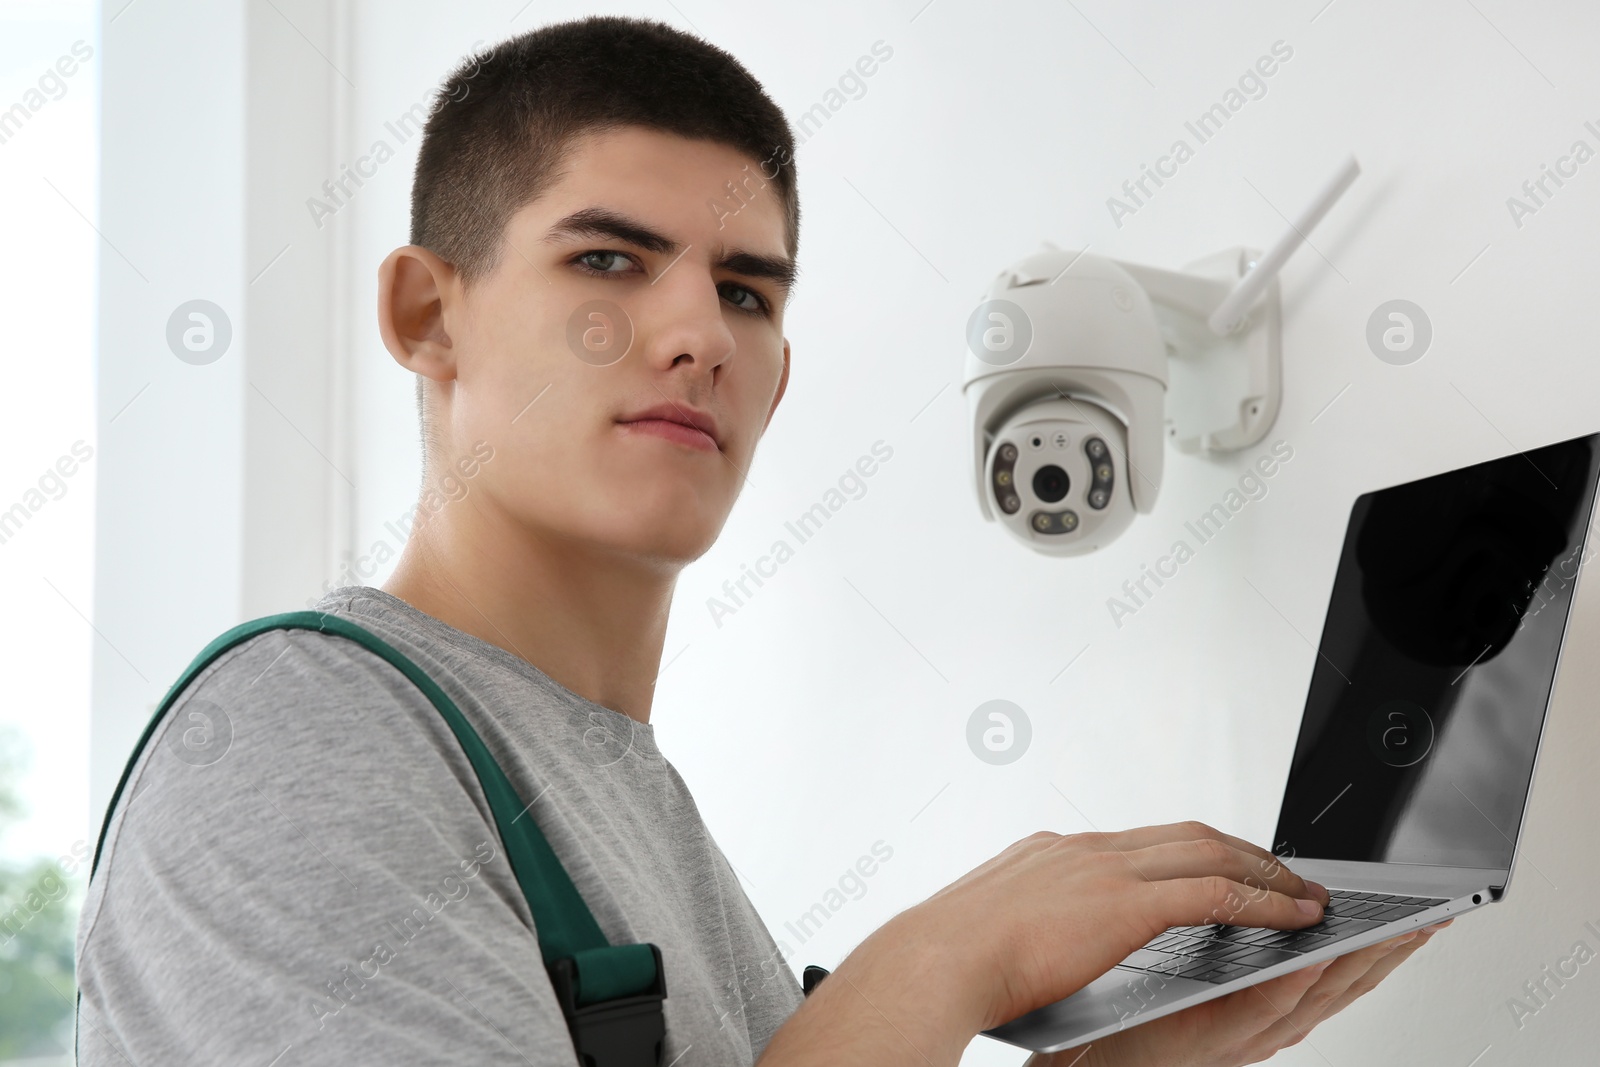 Photo of Technician with laptop installing CCTV camera on wall indoors